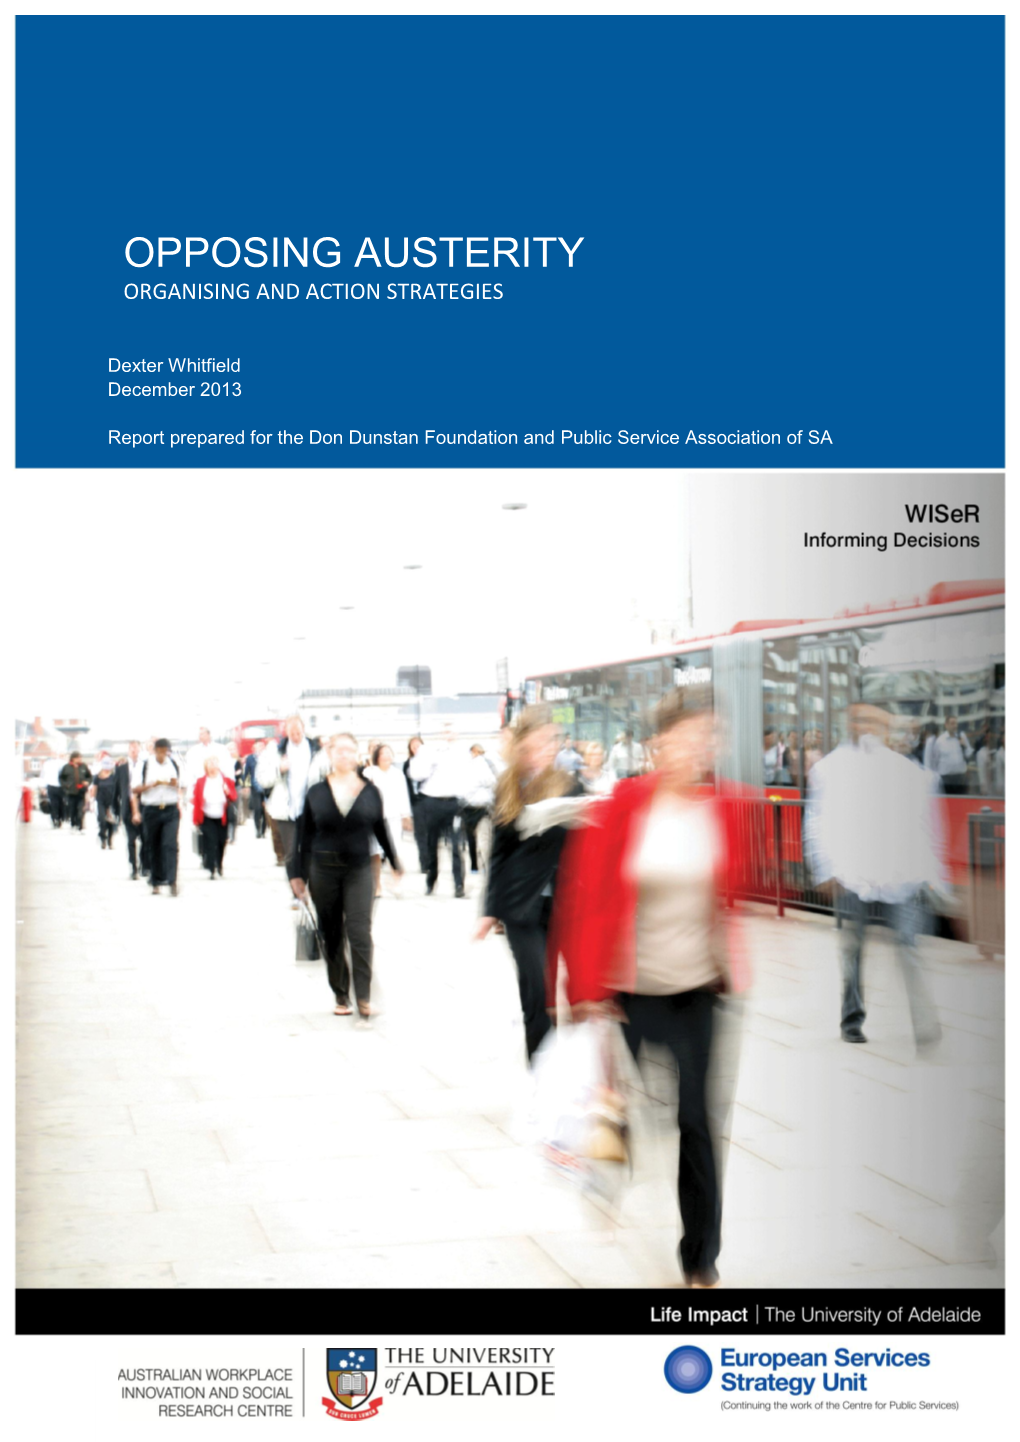 Opposing Austerity Organising and Action Strategies